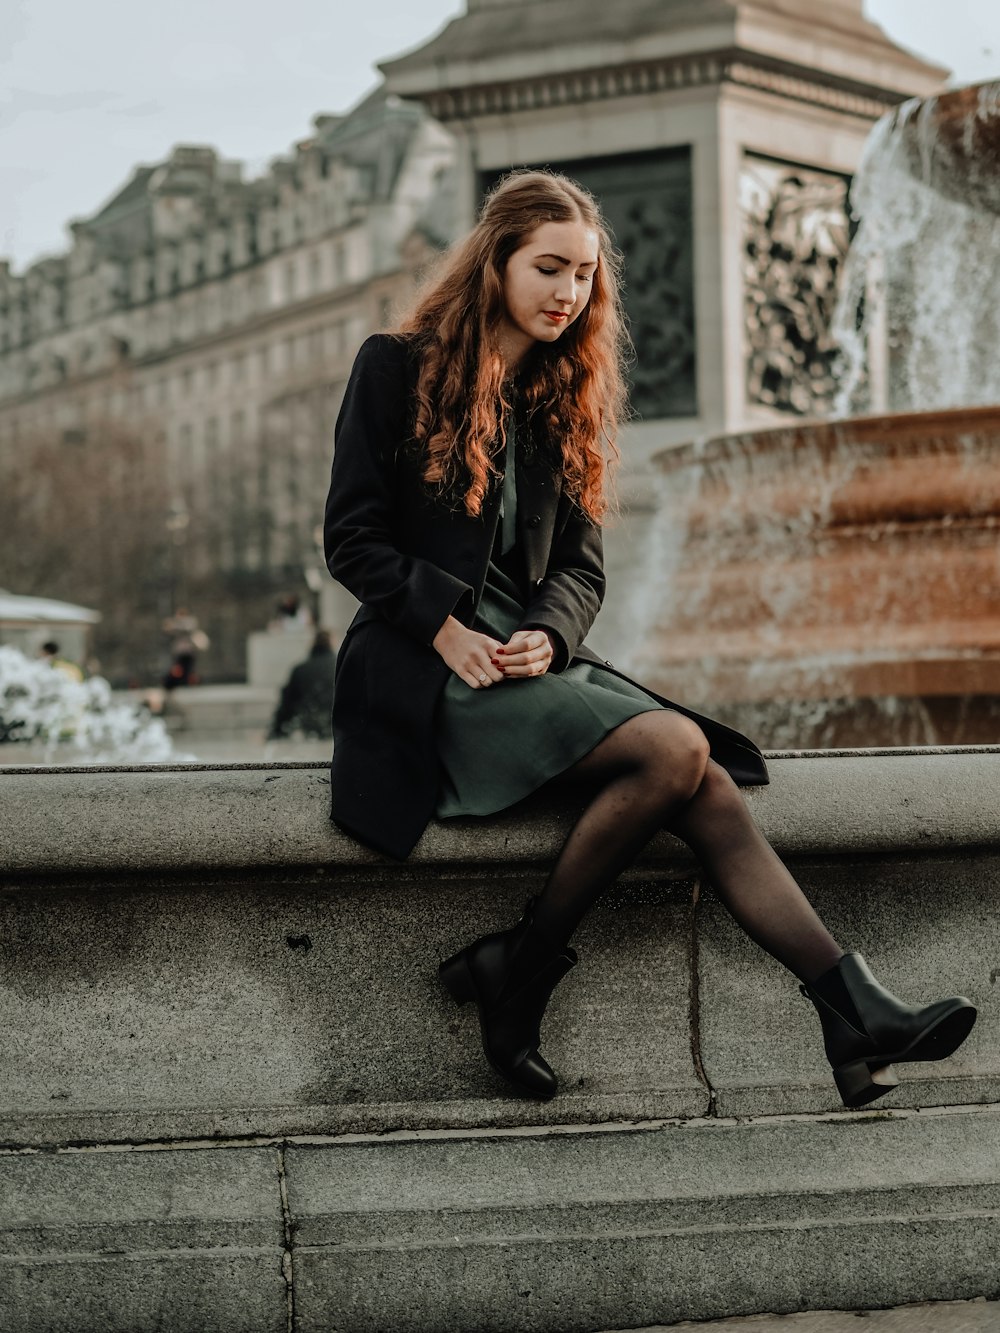 woman in black coat sitting on concrete bench during daytime